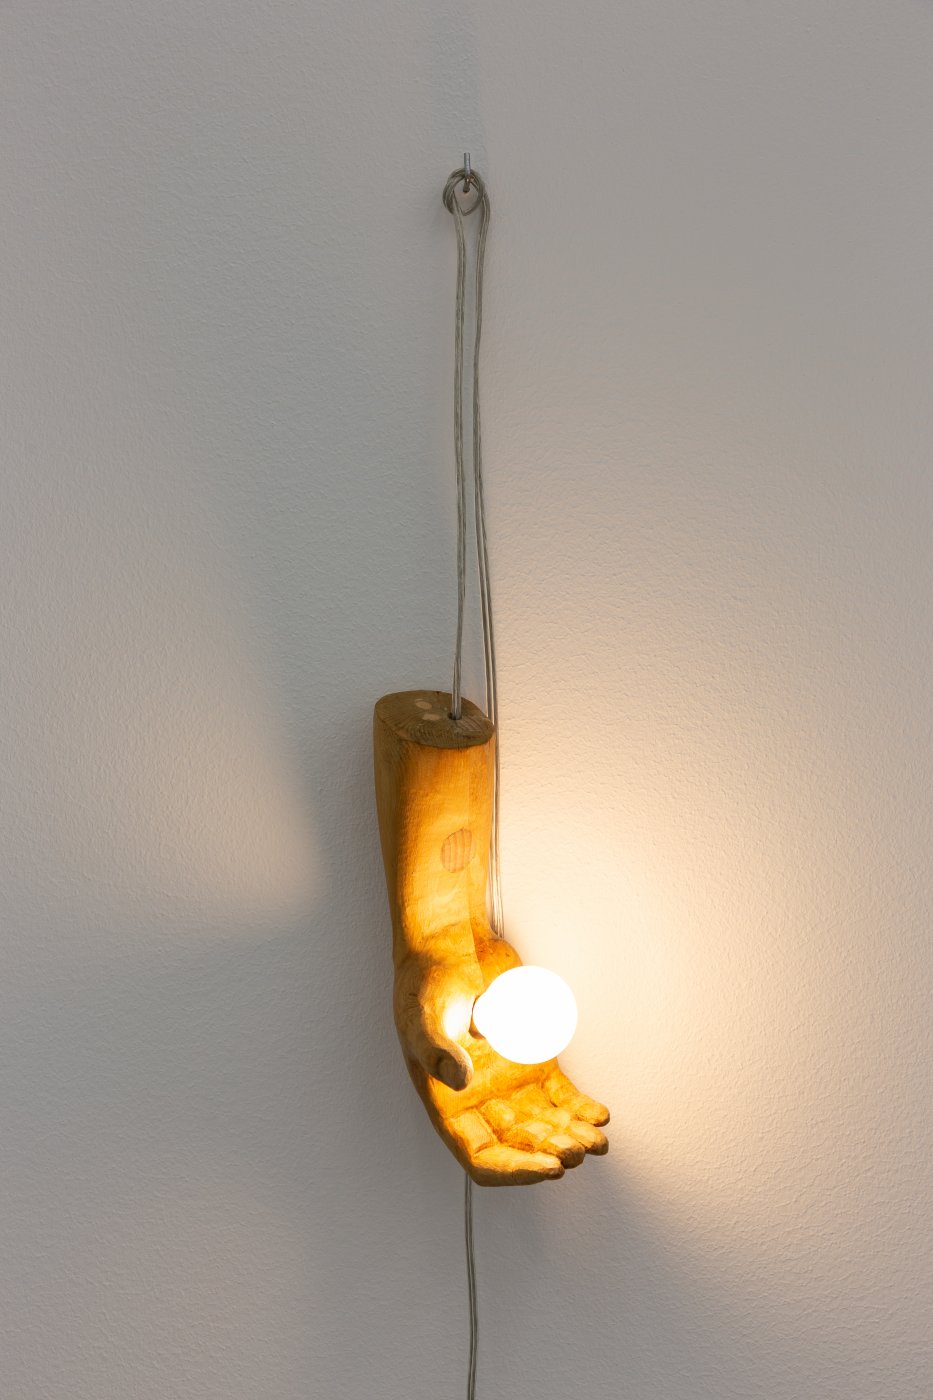 André Romão, The visitor (right), 2022. Re-worked sculptural fragment (wood, probably Spain, late 1700s), wood, electrical components, light bulb. 21 × 12 × 9 cm. Unique
